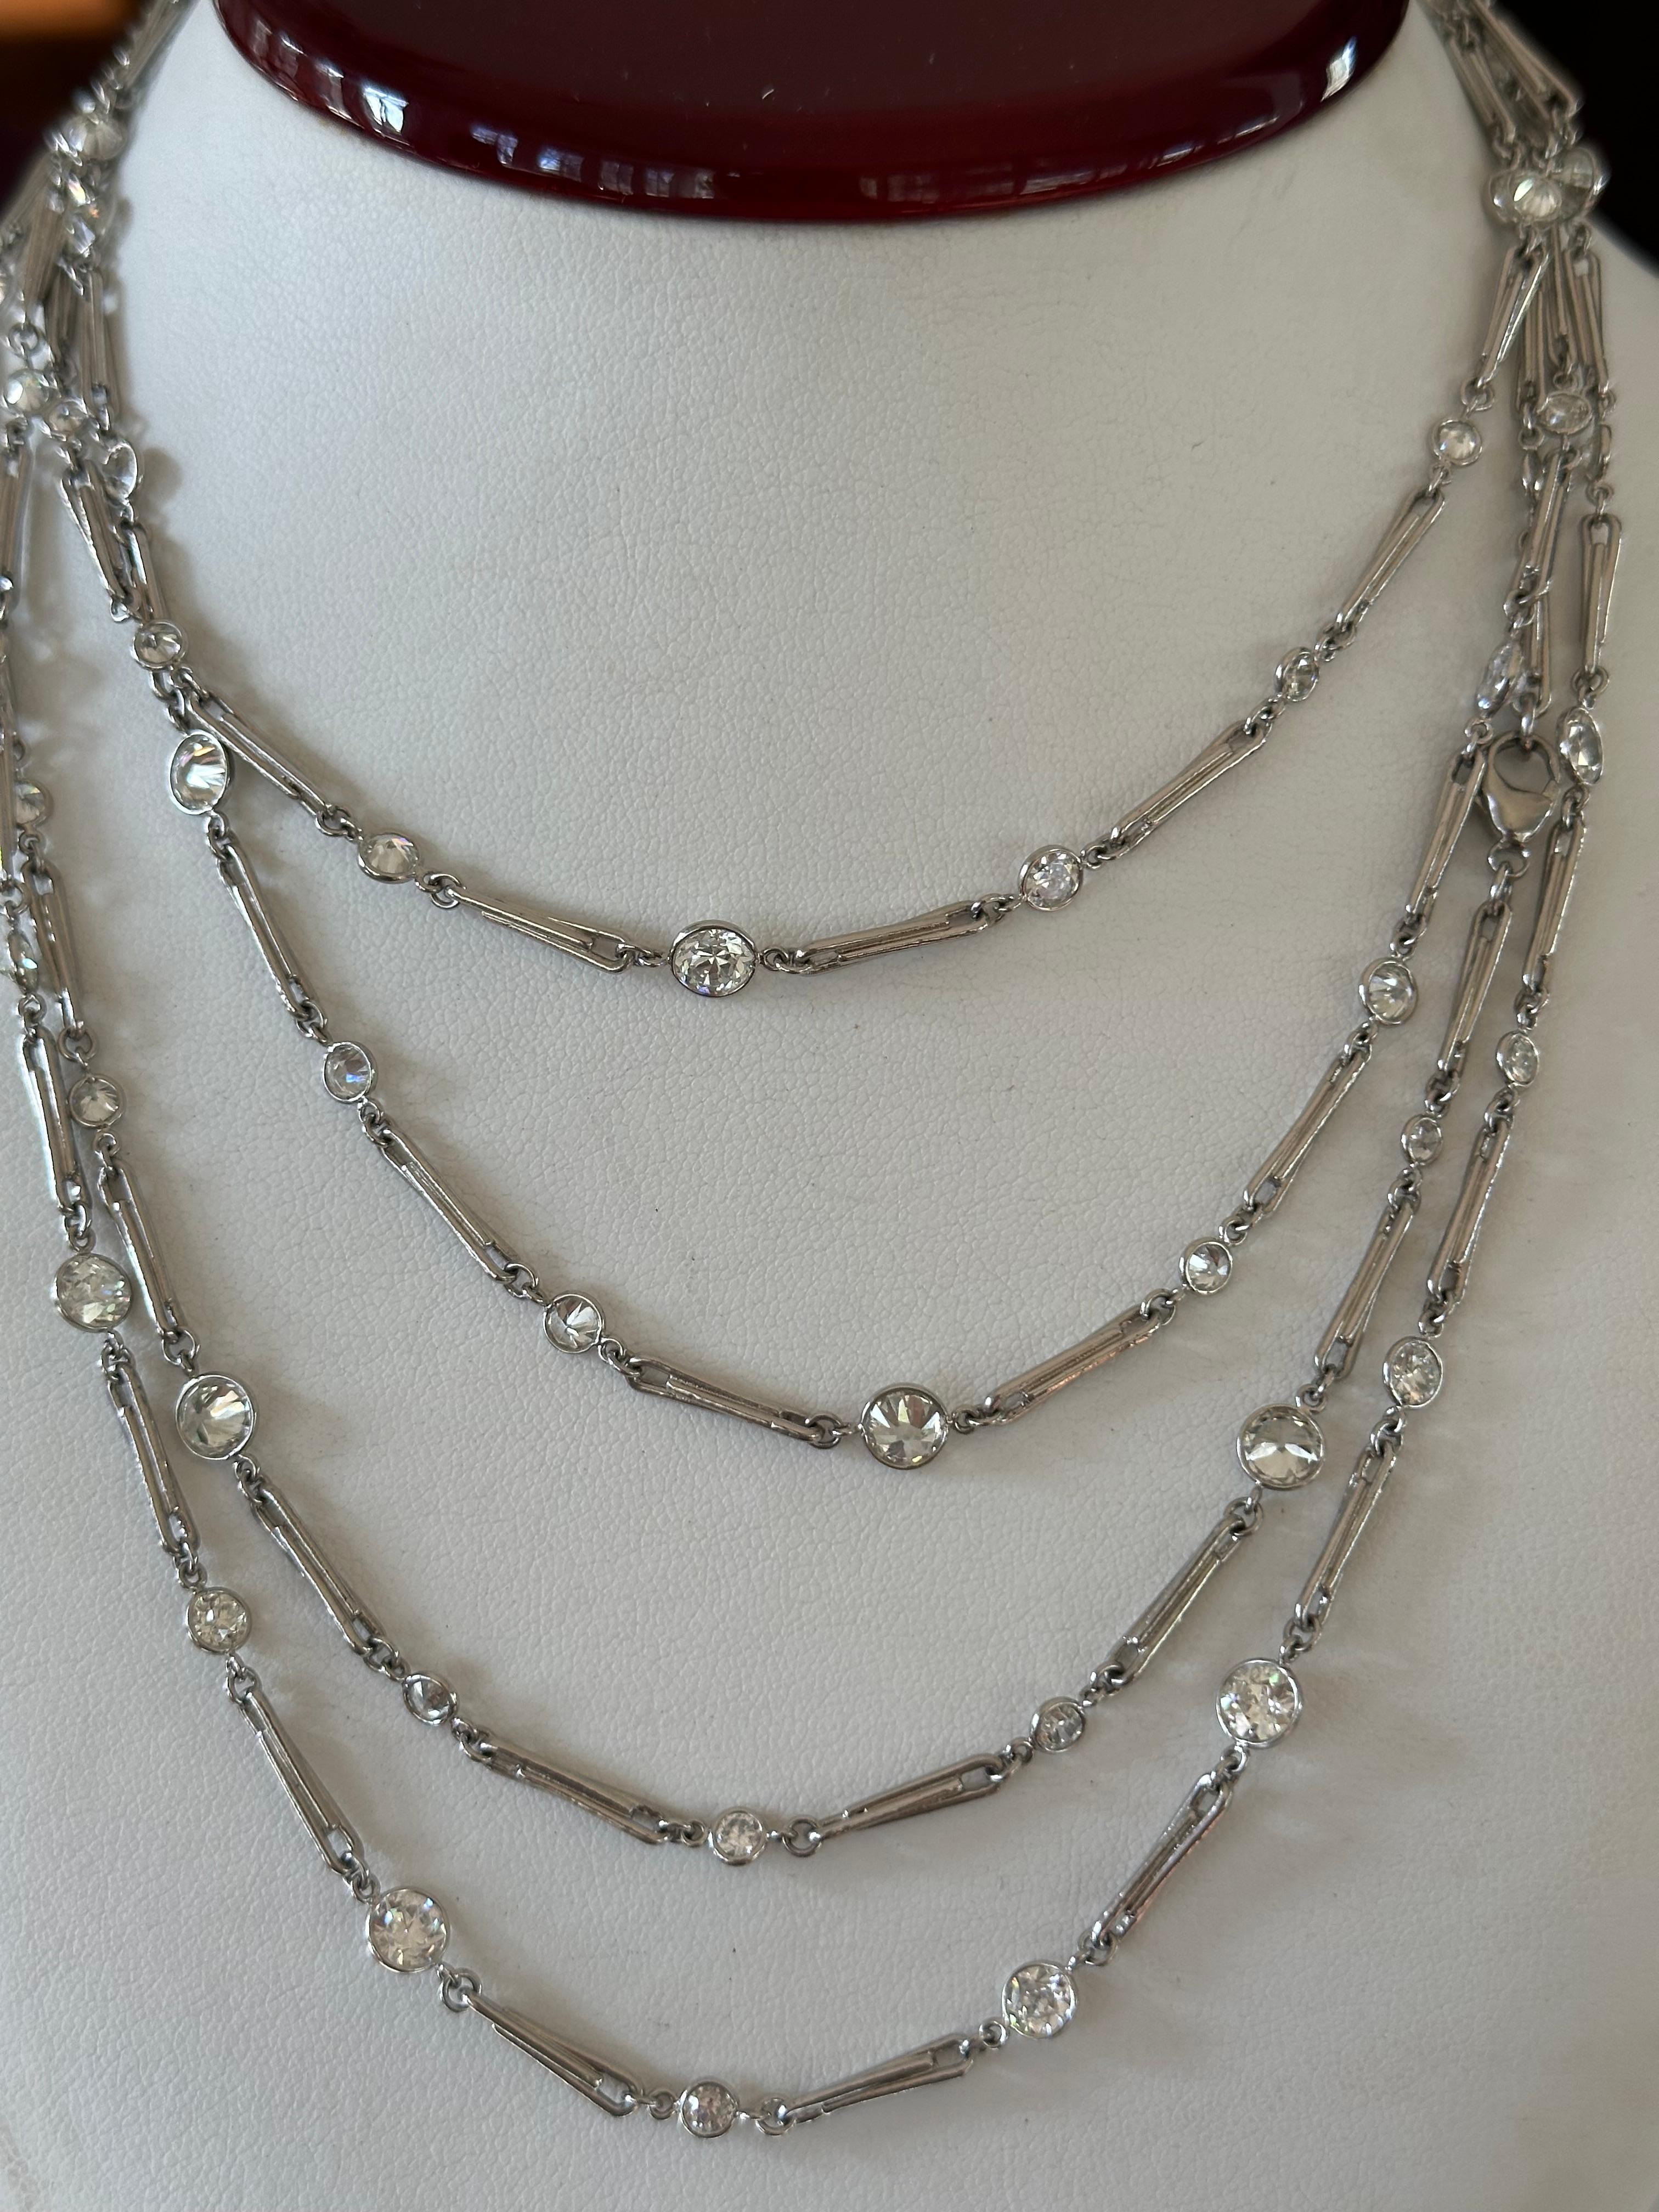 Old European Cut 70.5 Inch Antique Style Diamonds-By-the-Yard Necklace 